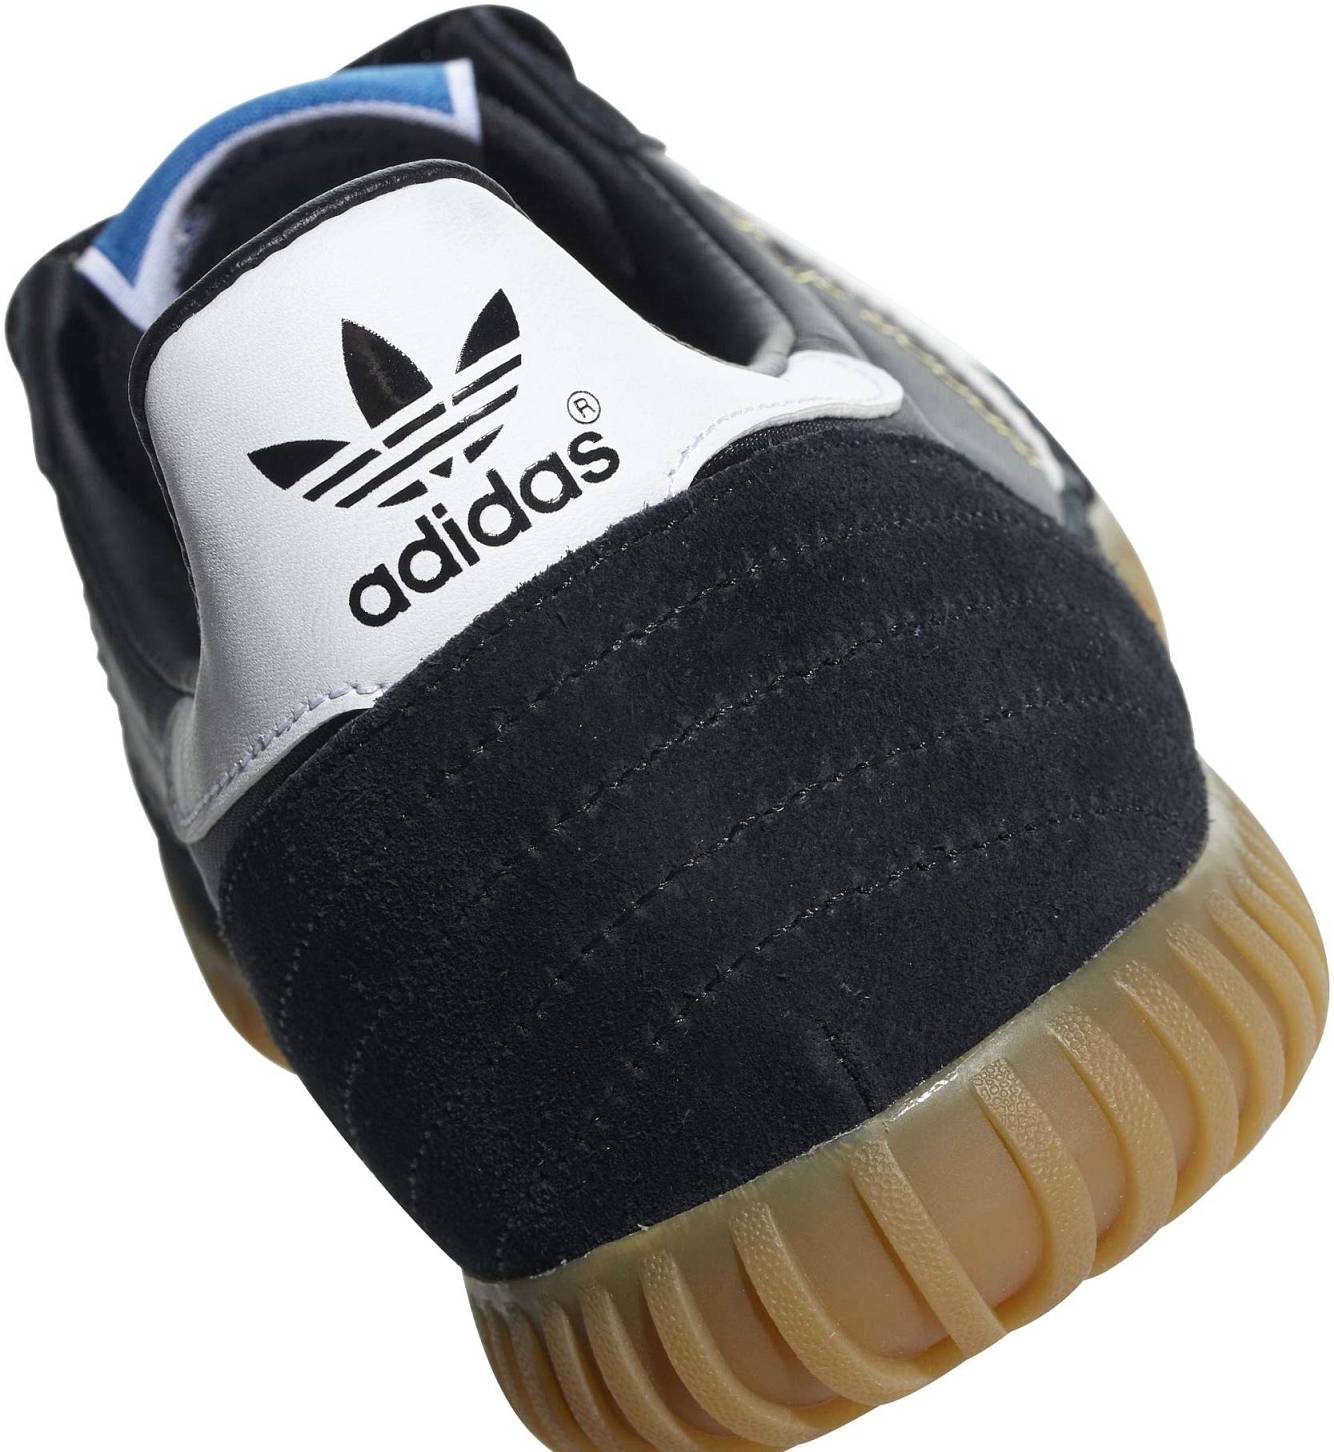 adidas indoor super shoes review